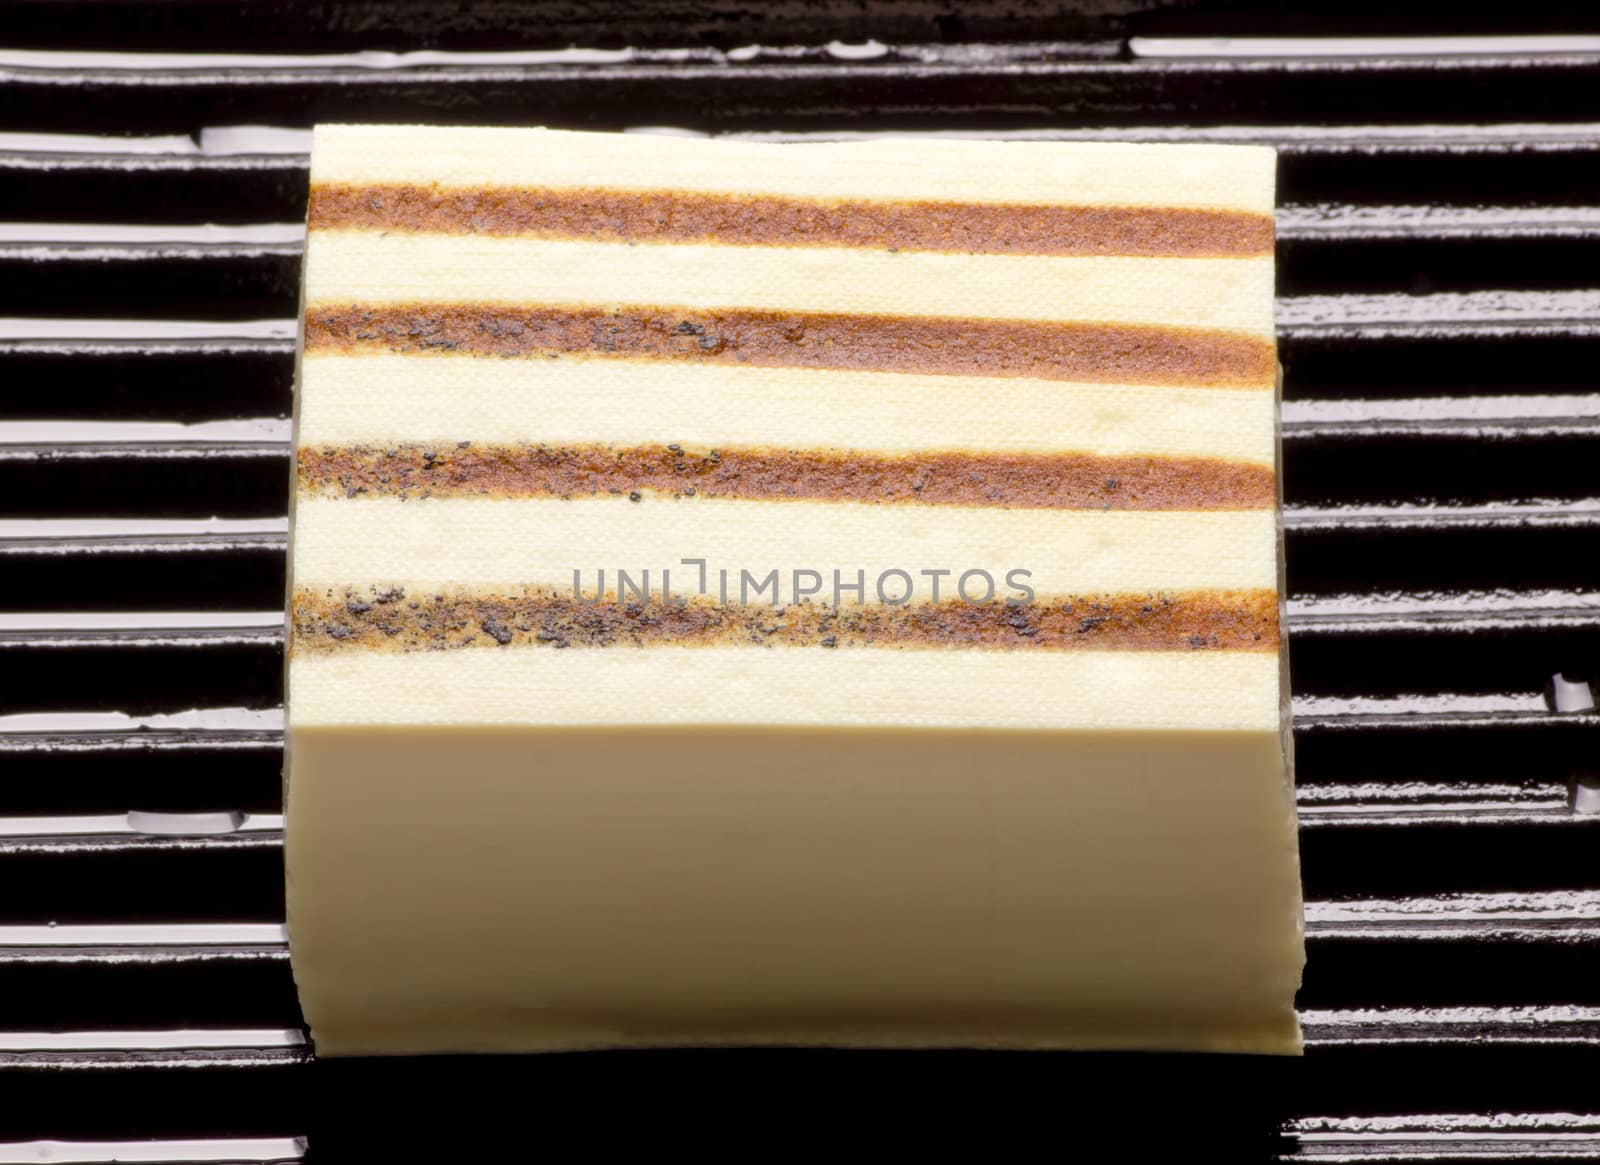 close up of a slab of tofu on a grill